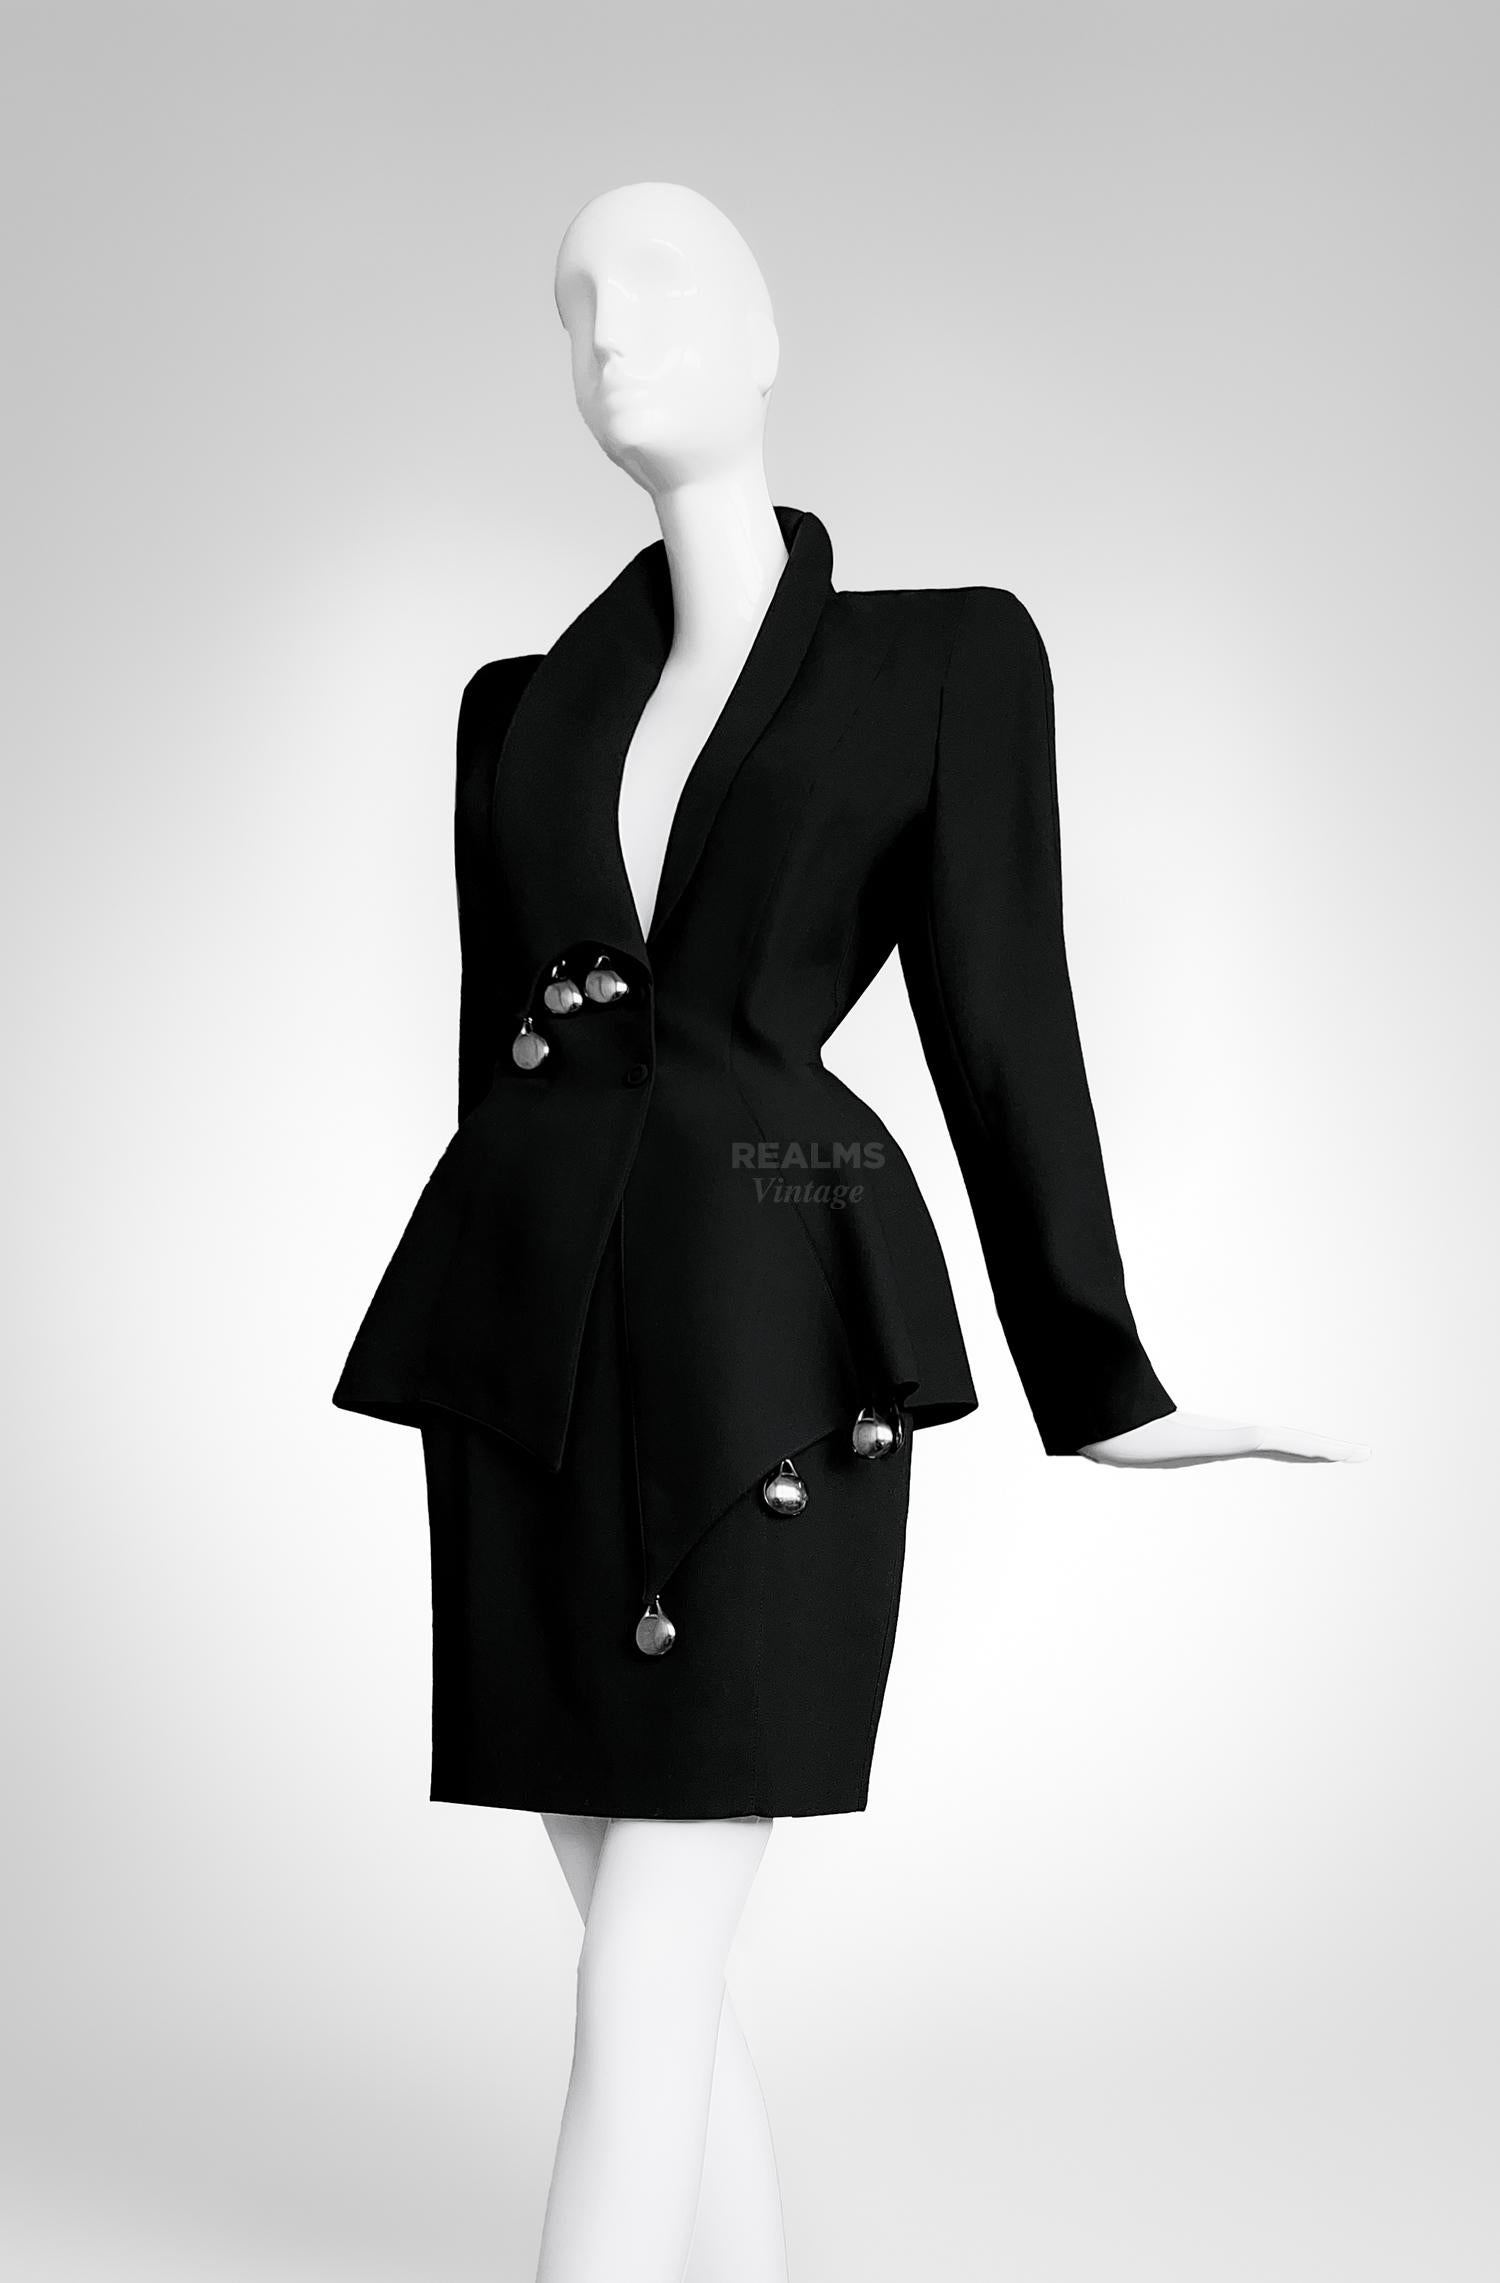 Thierry Mugler black skirt suit Spring Summer 1989 Collection.
Fabulous extremely rare Collector's Piece.

Dramatic black two piece ensemble (jacket and skirt).  
Masterful construction, a fabulous Thierry Mugler creation. 
Extraordinairy shape!